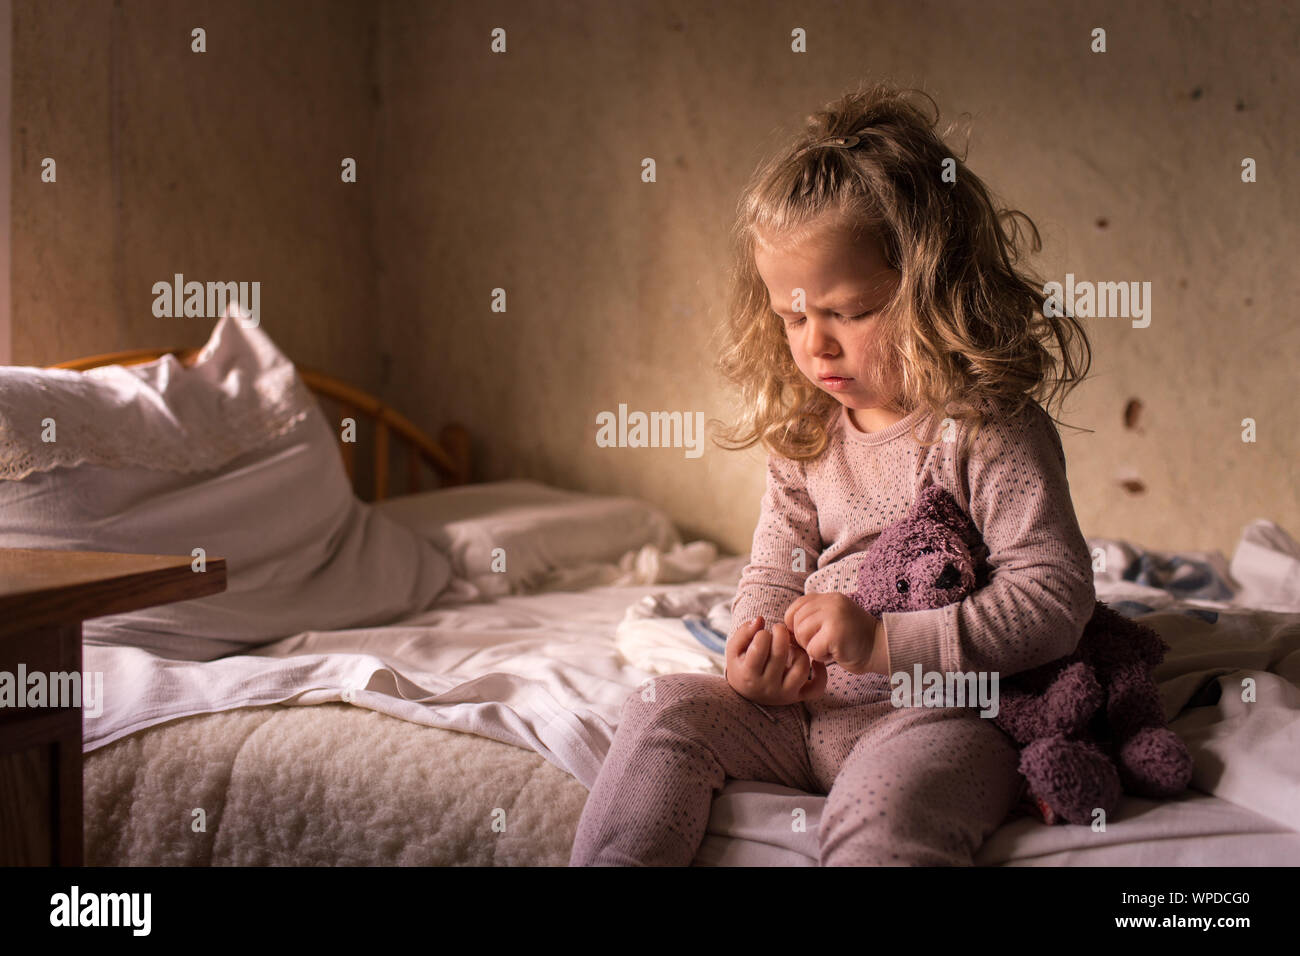 Little kid, sitting on a bed with favorite stuffed toy animal, with serious, worried face expression Stock Photo